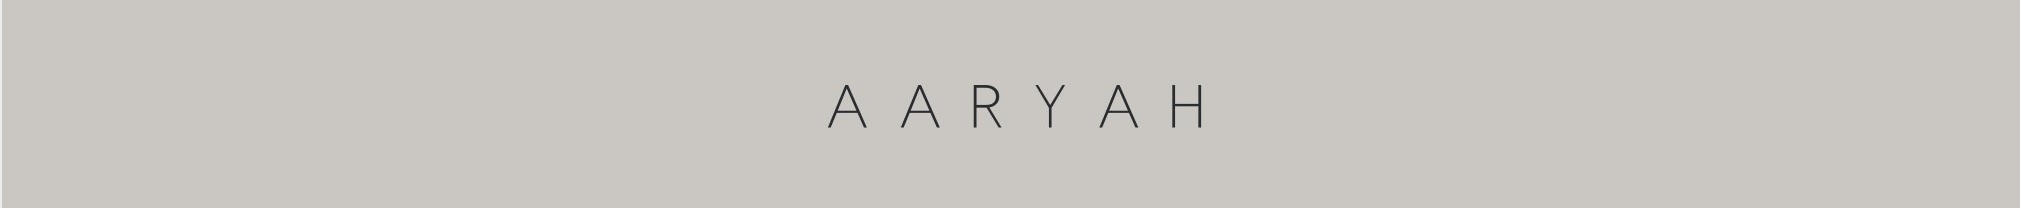 How to Find Your Ring Size - AARYAH LOGO 2048x2048